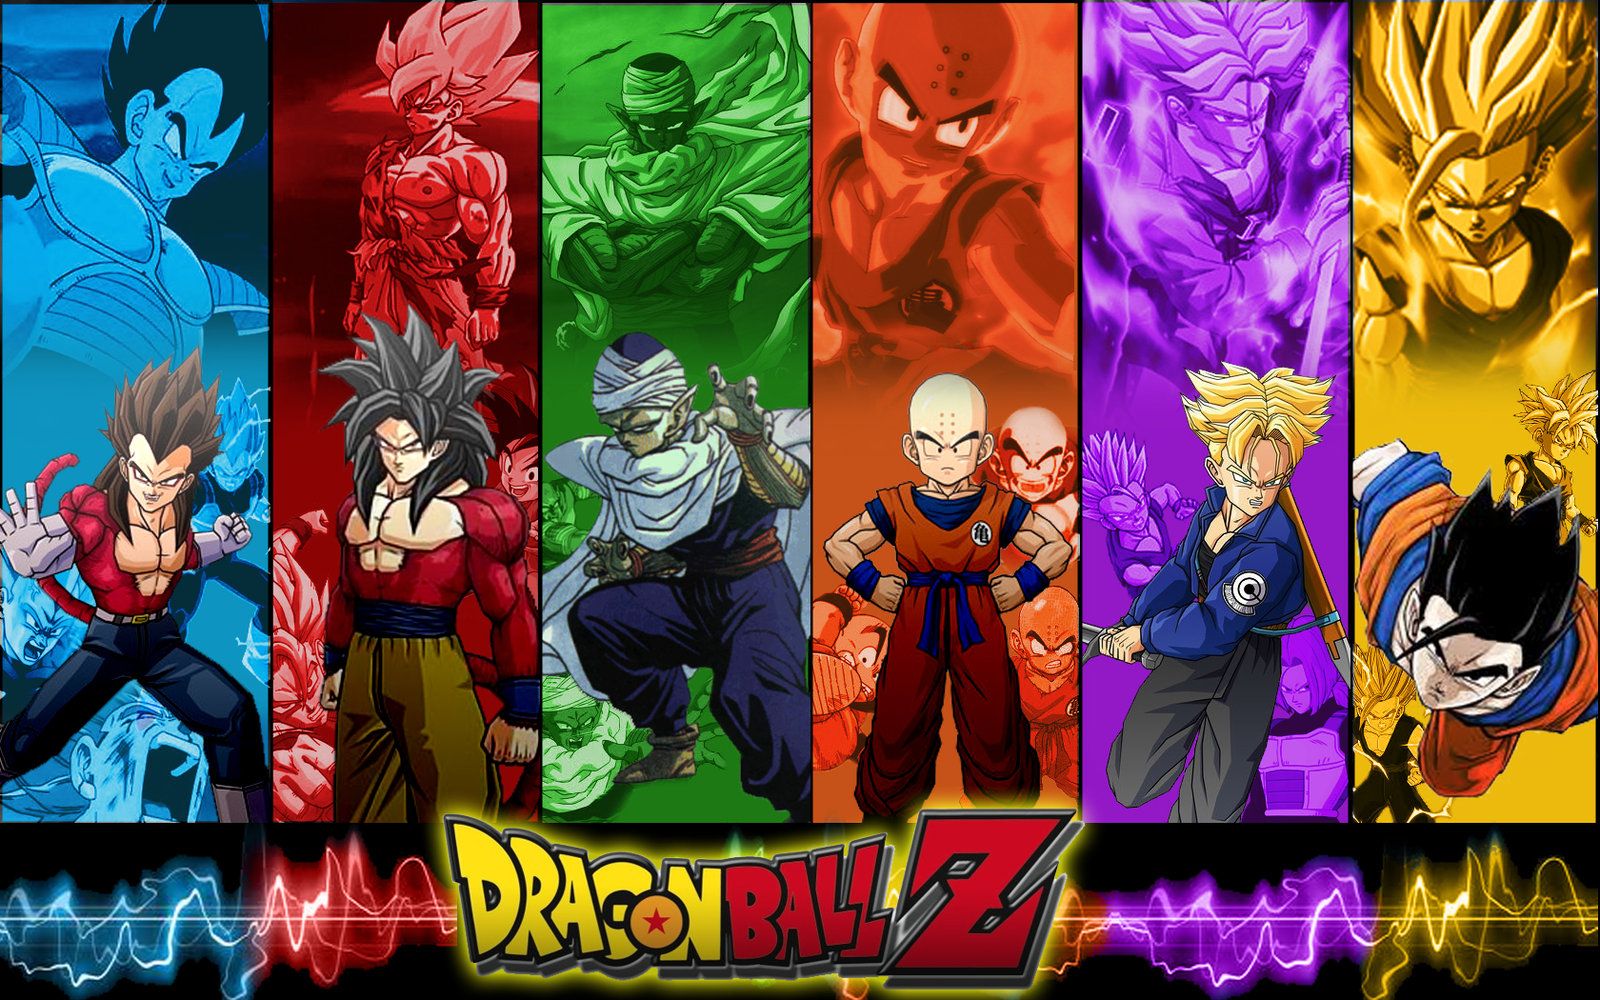 Dragon Ball Z Wallpapers 13 - Best Wallpaper Collection